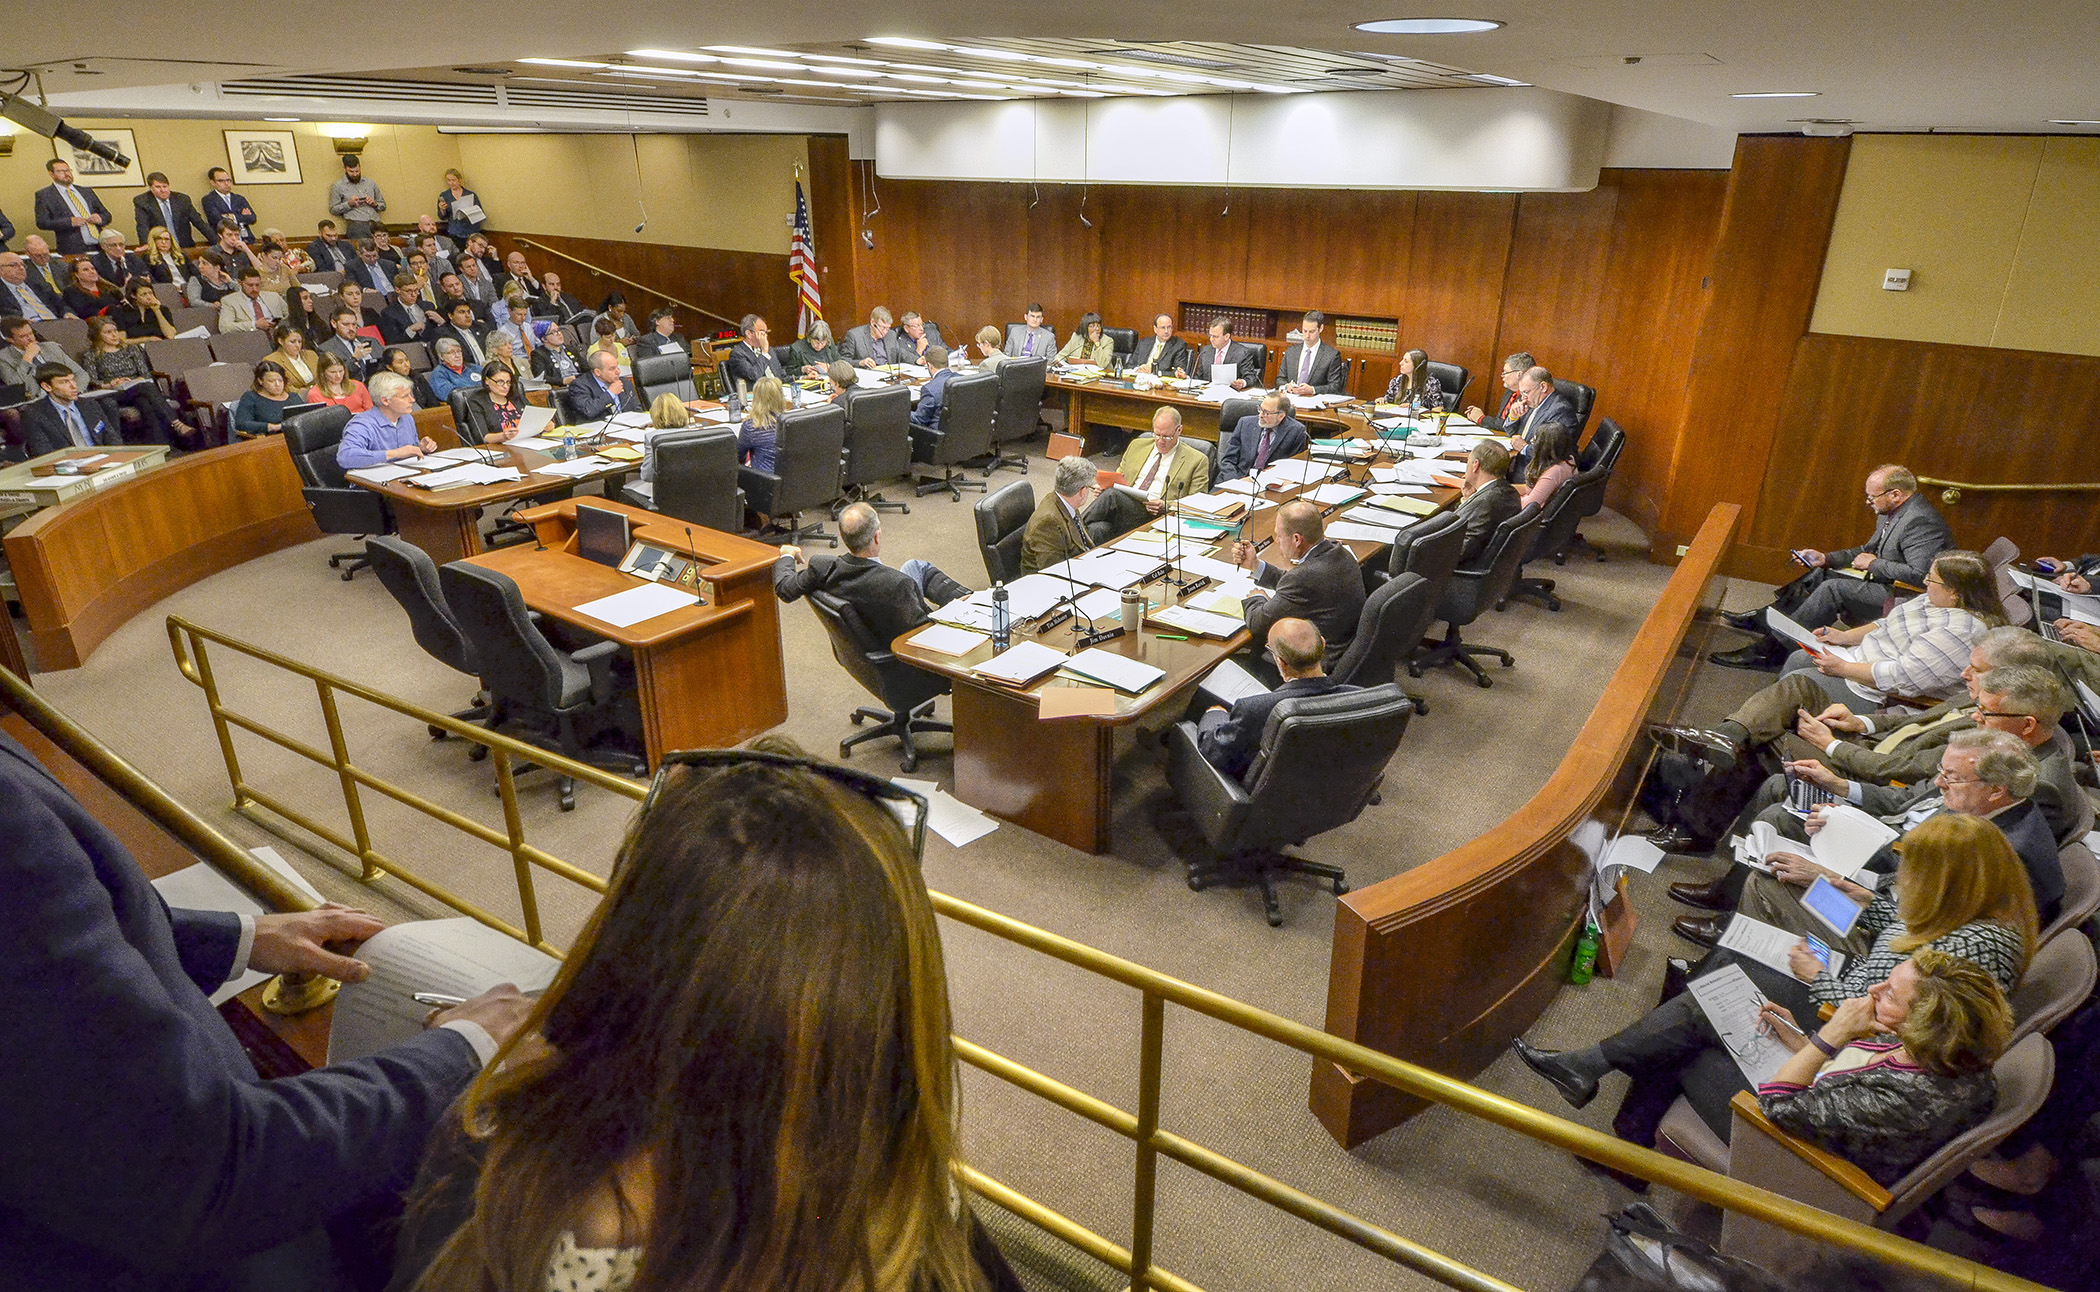 At a well-attended hearing, members of the House Job Growth and Energy Affordability Policy and Finance Committee consider amendments to the committee’s omnibus bill March 28. Photo by Andrew VonBank